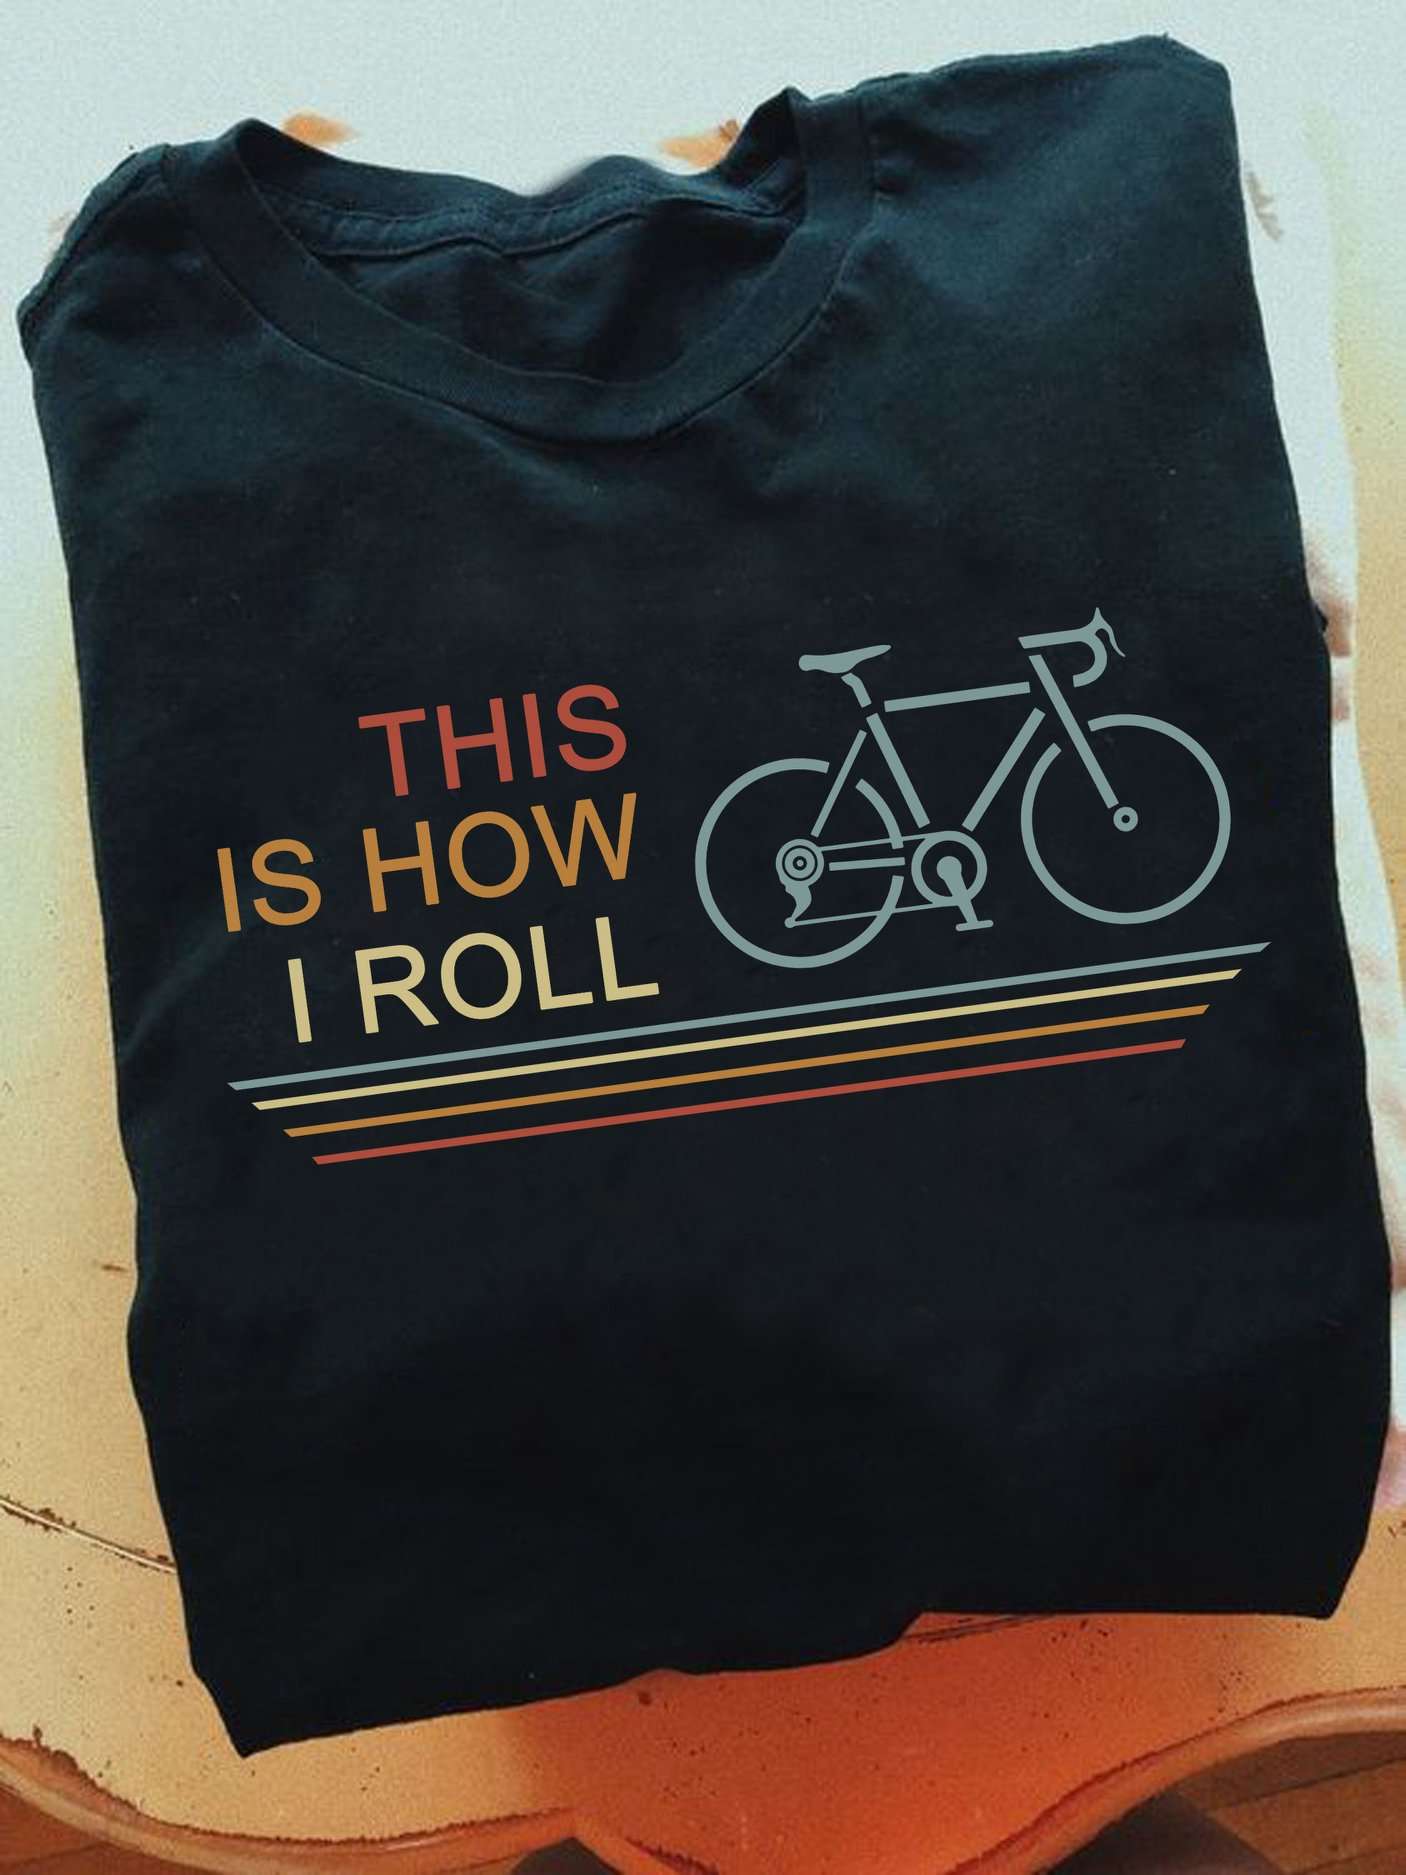 Love Cycling - This is how i roll